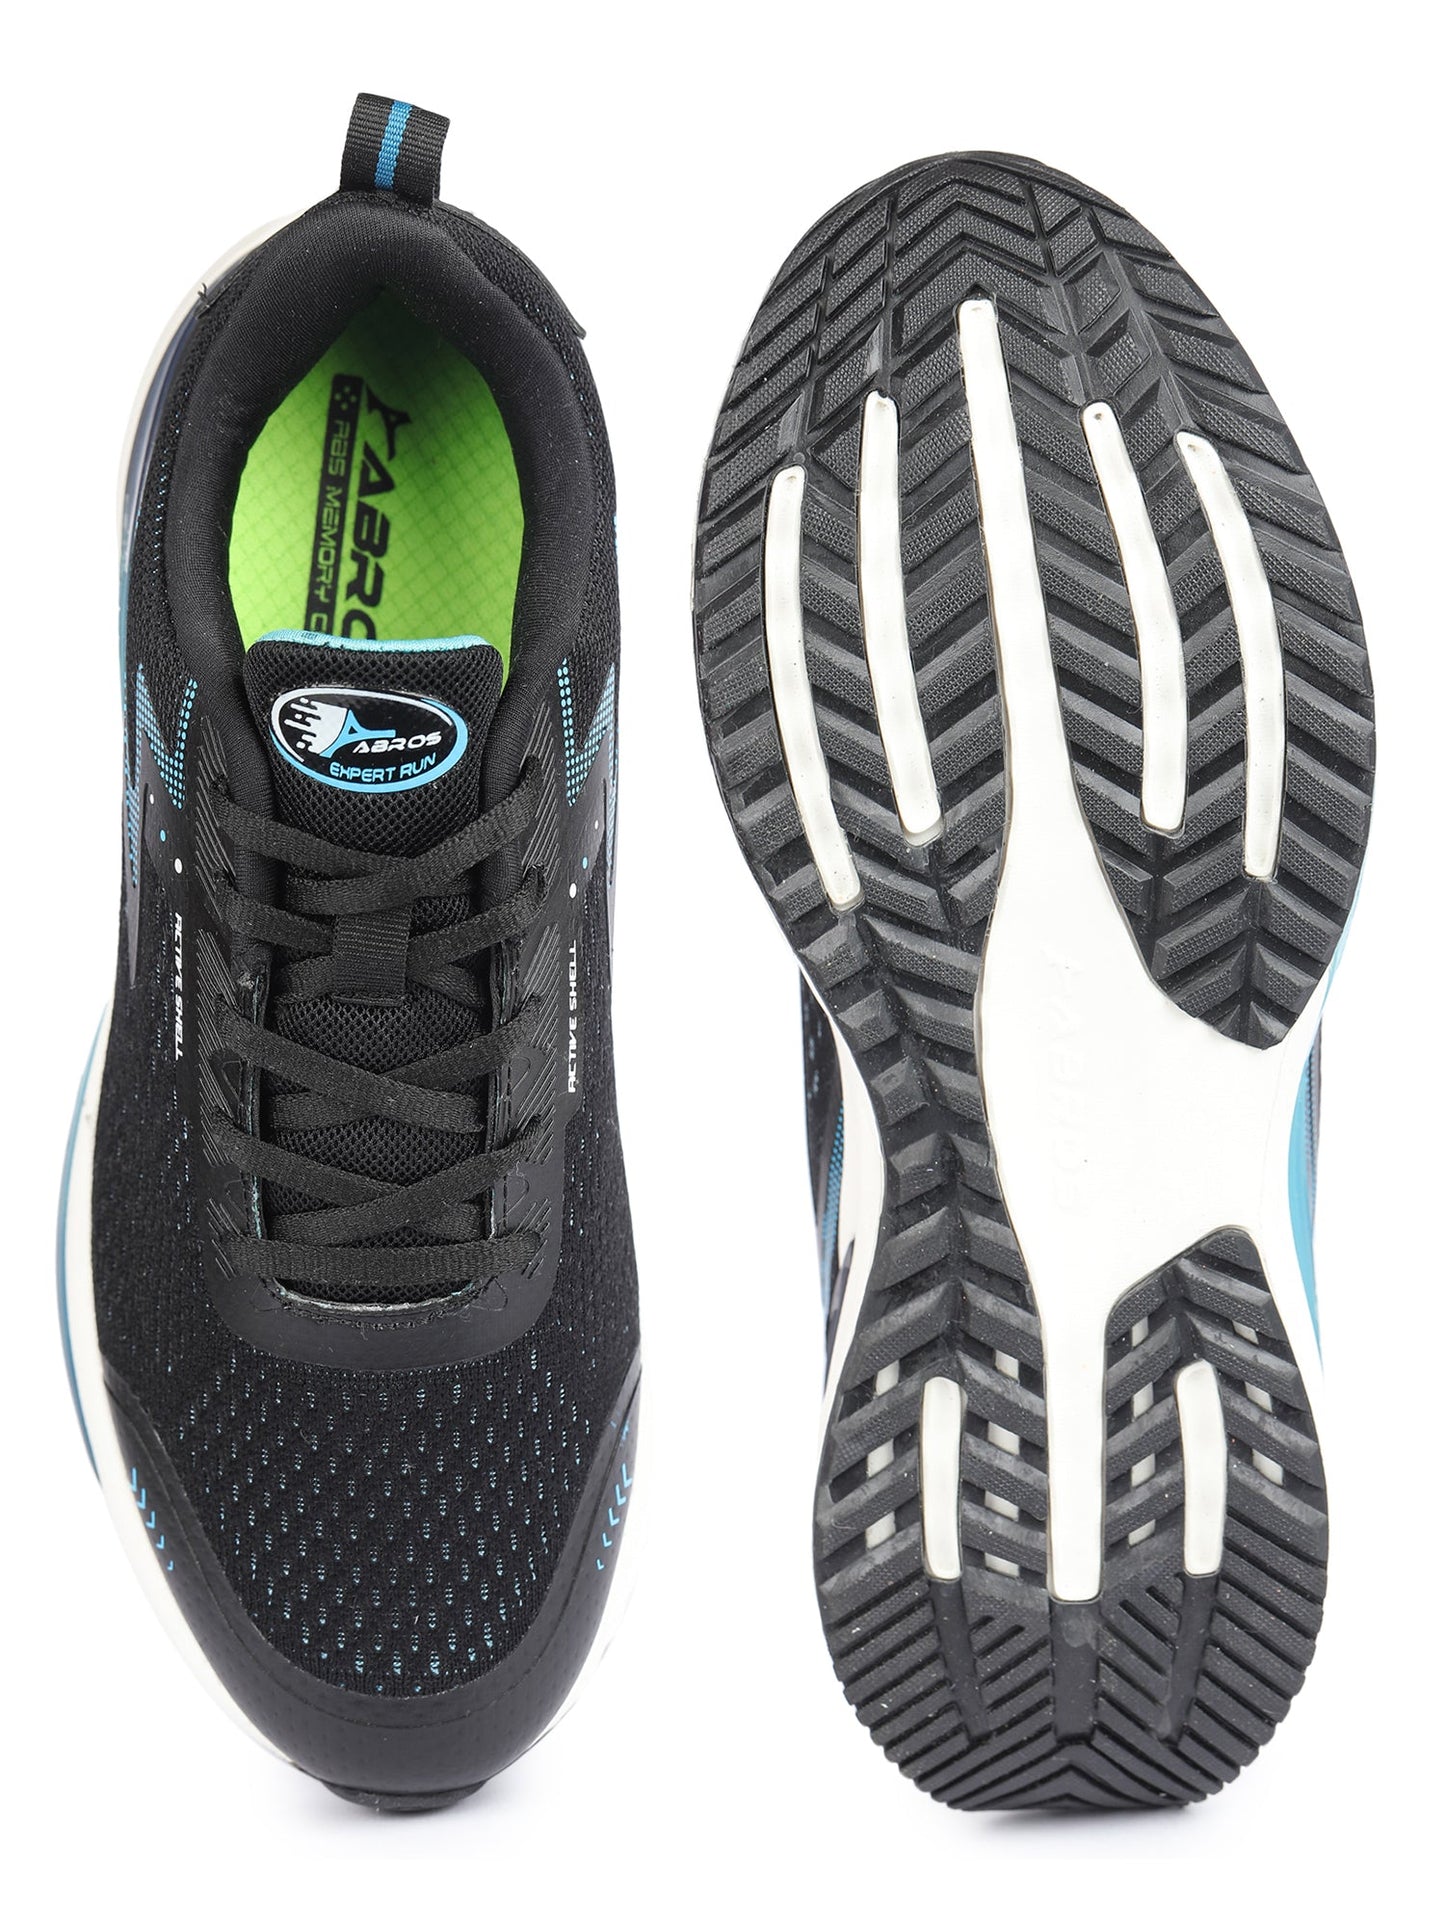 GLOSTER SPORT-SHOES FOR MEN